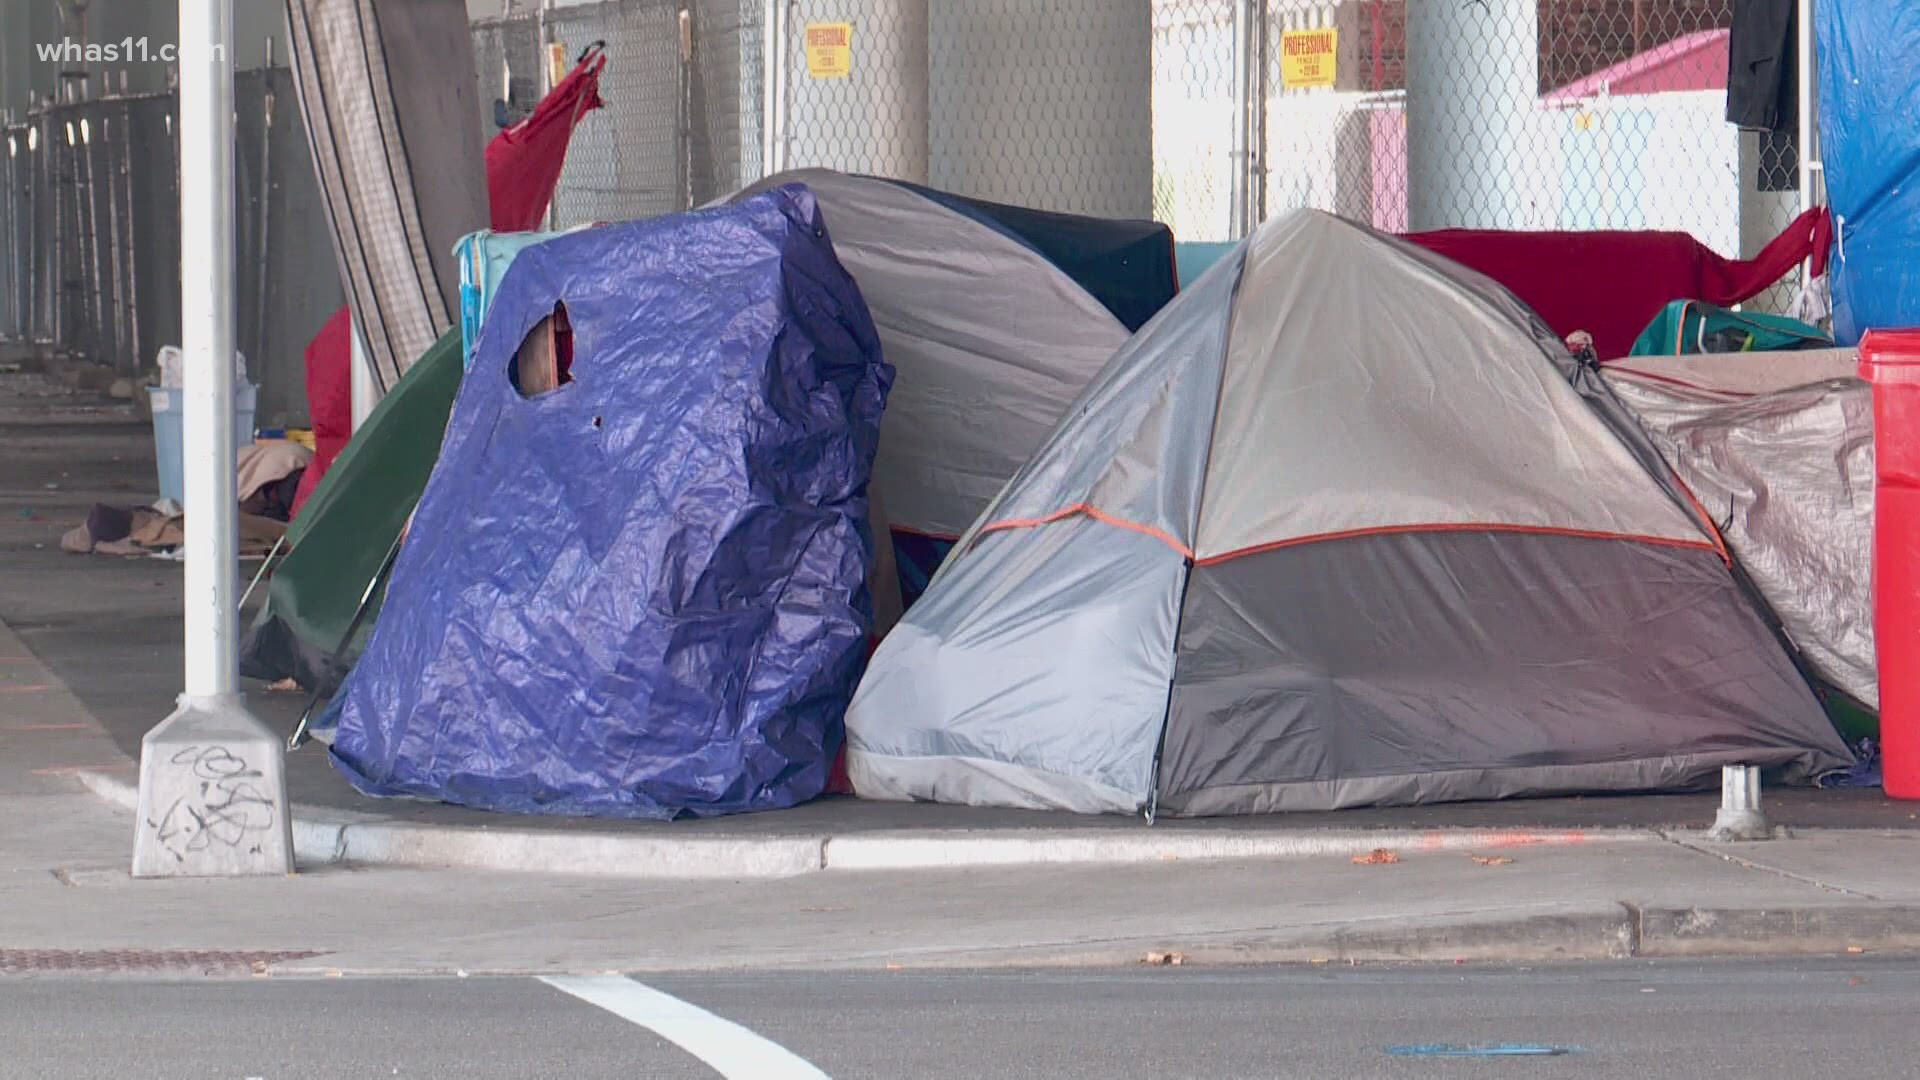 Officials also shared a four-phase plan for addressing the city's homelessness as Louisville resumes clearing homeless camps.